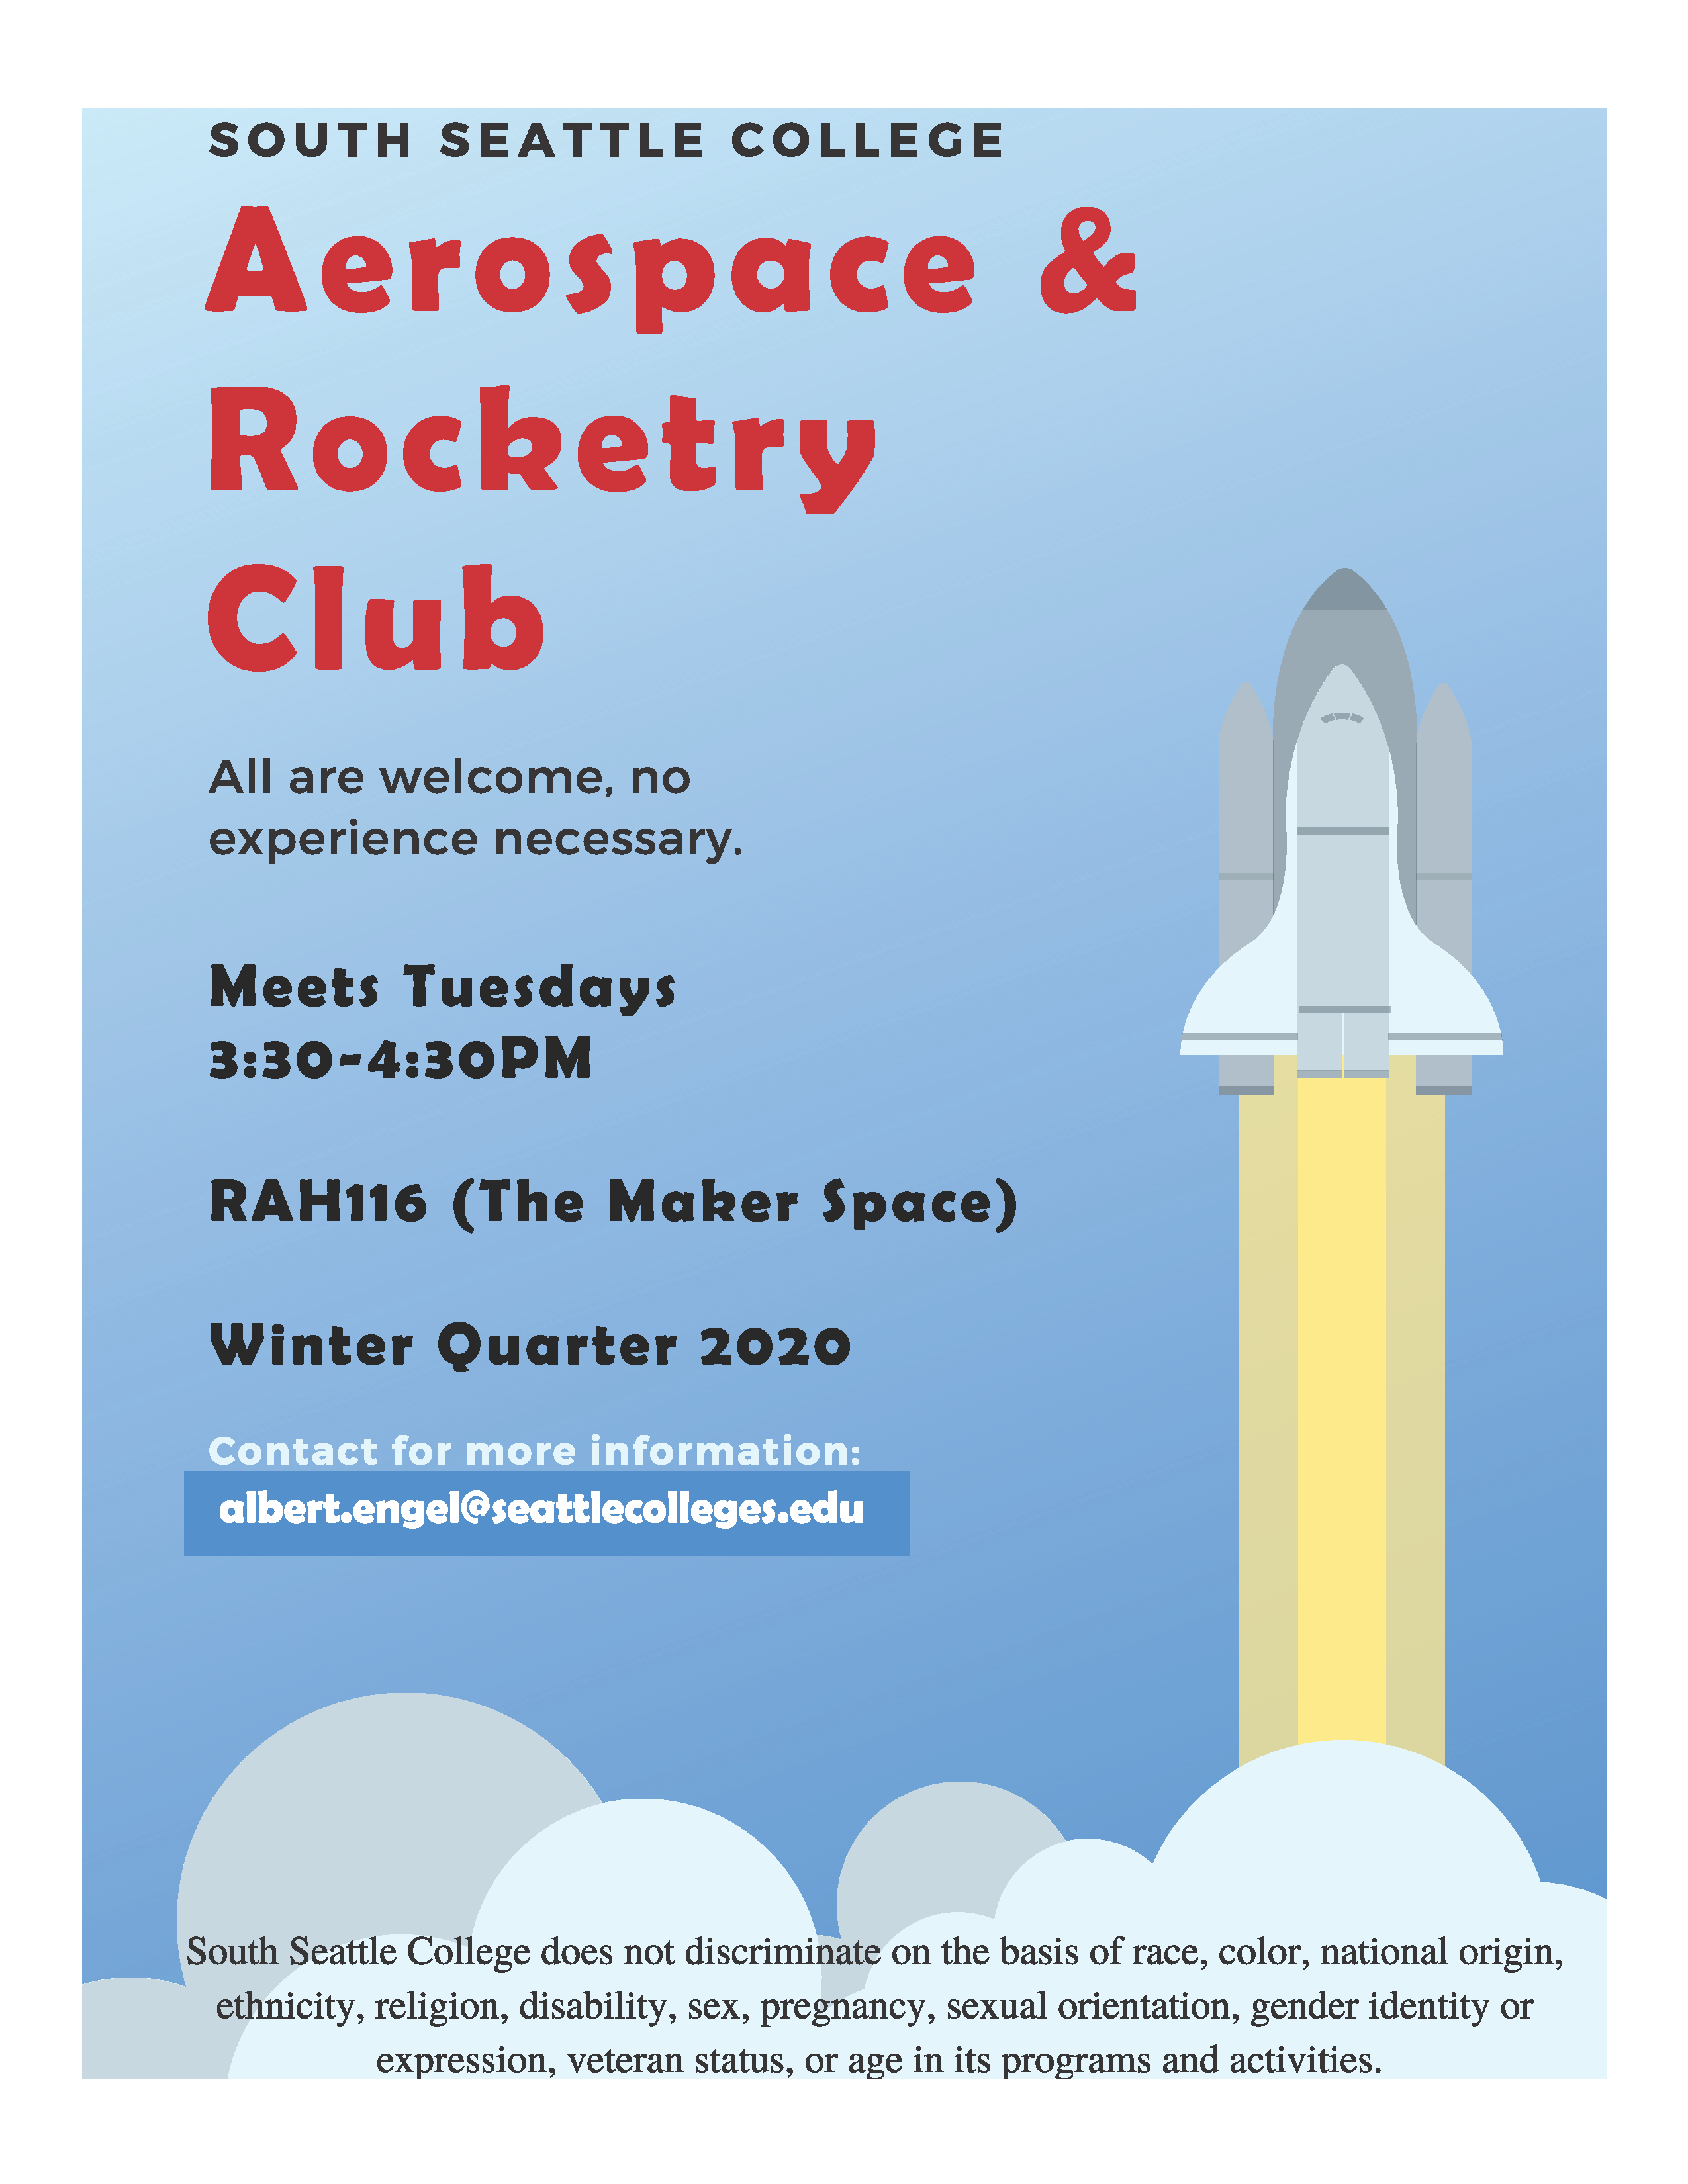 Aerospace &amp; Rocketry Club. All are welcome, no experience necessary. Meets Tuesdays 3:30-4:30 pm